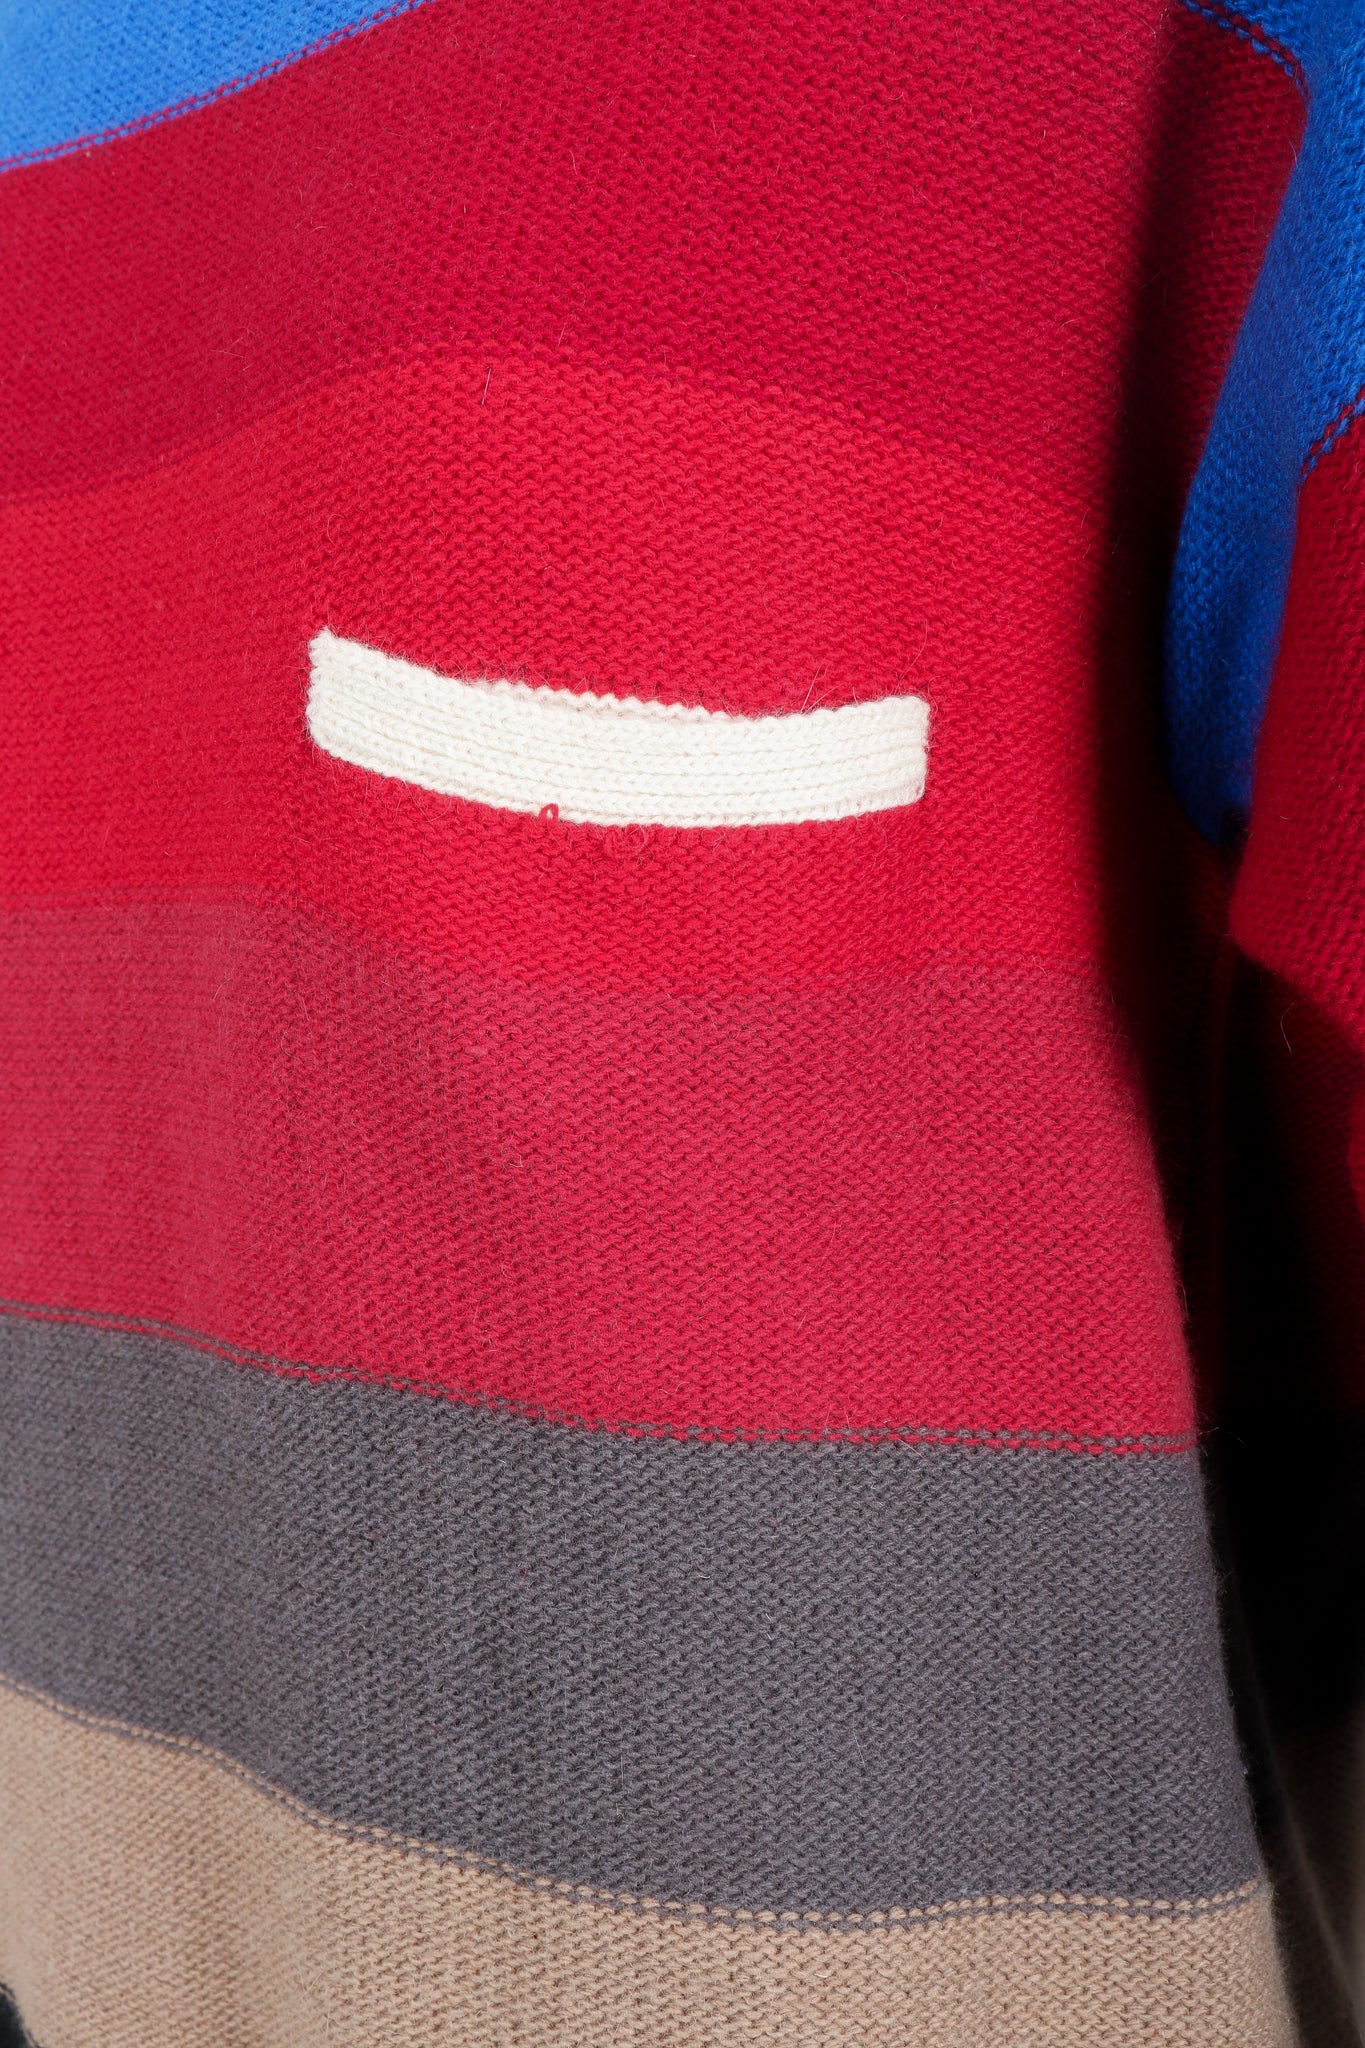 Vintage Sonia Rykiel Ombré Striped Knit Sweater on Mannequin pocket at Recess